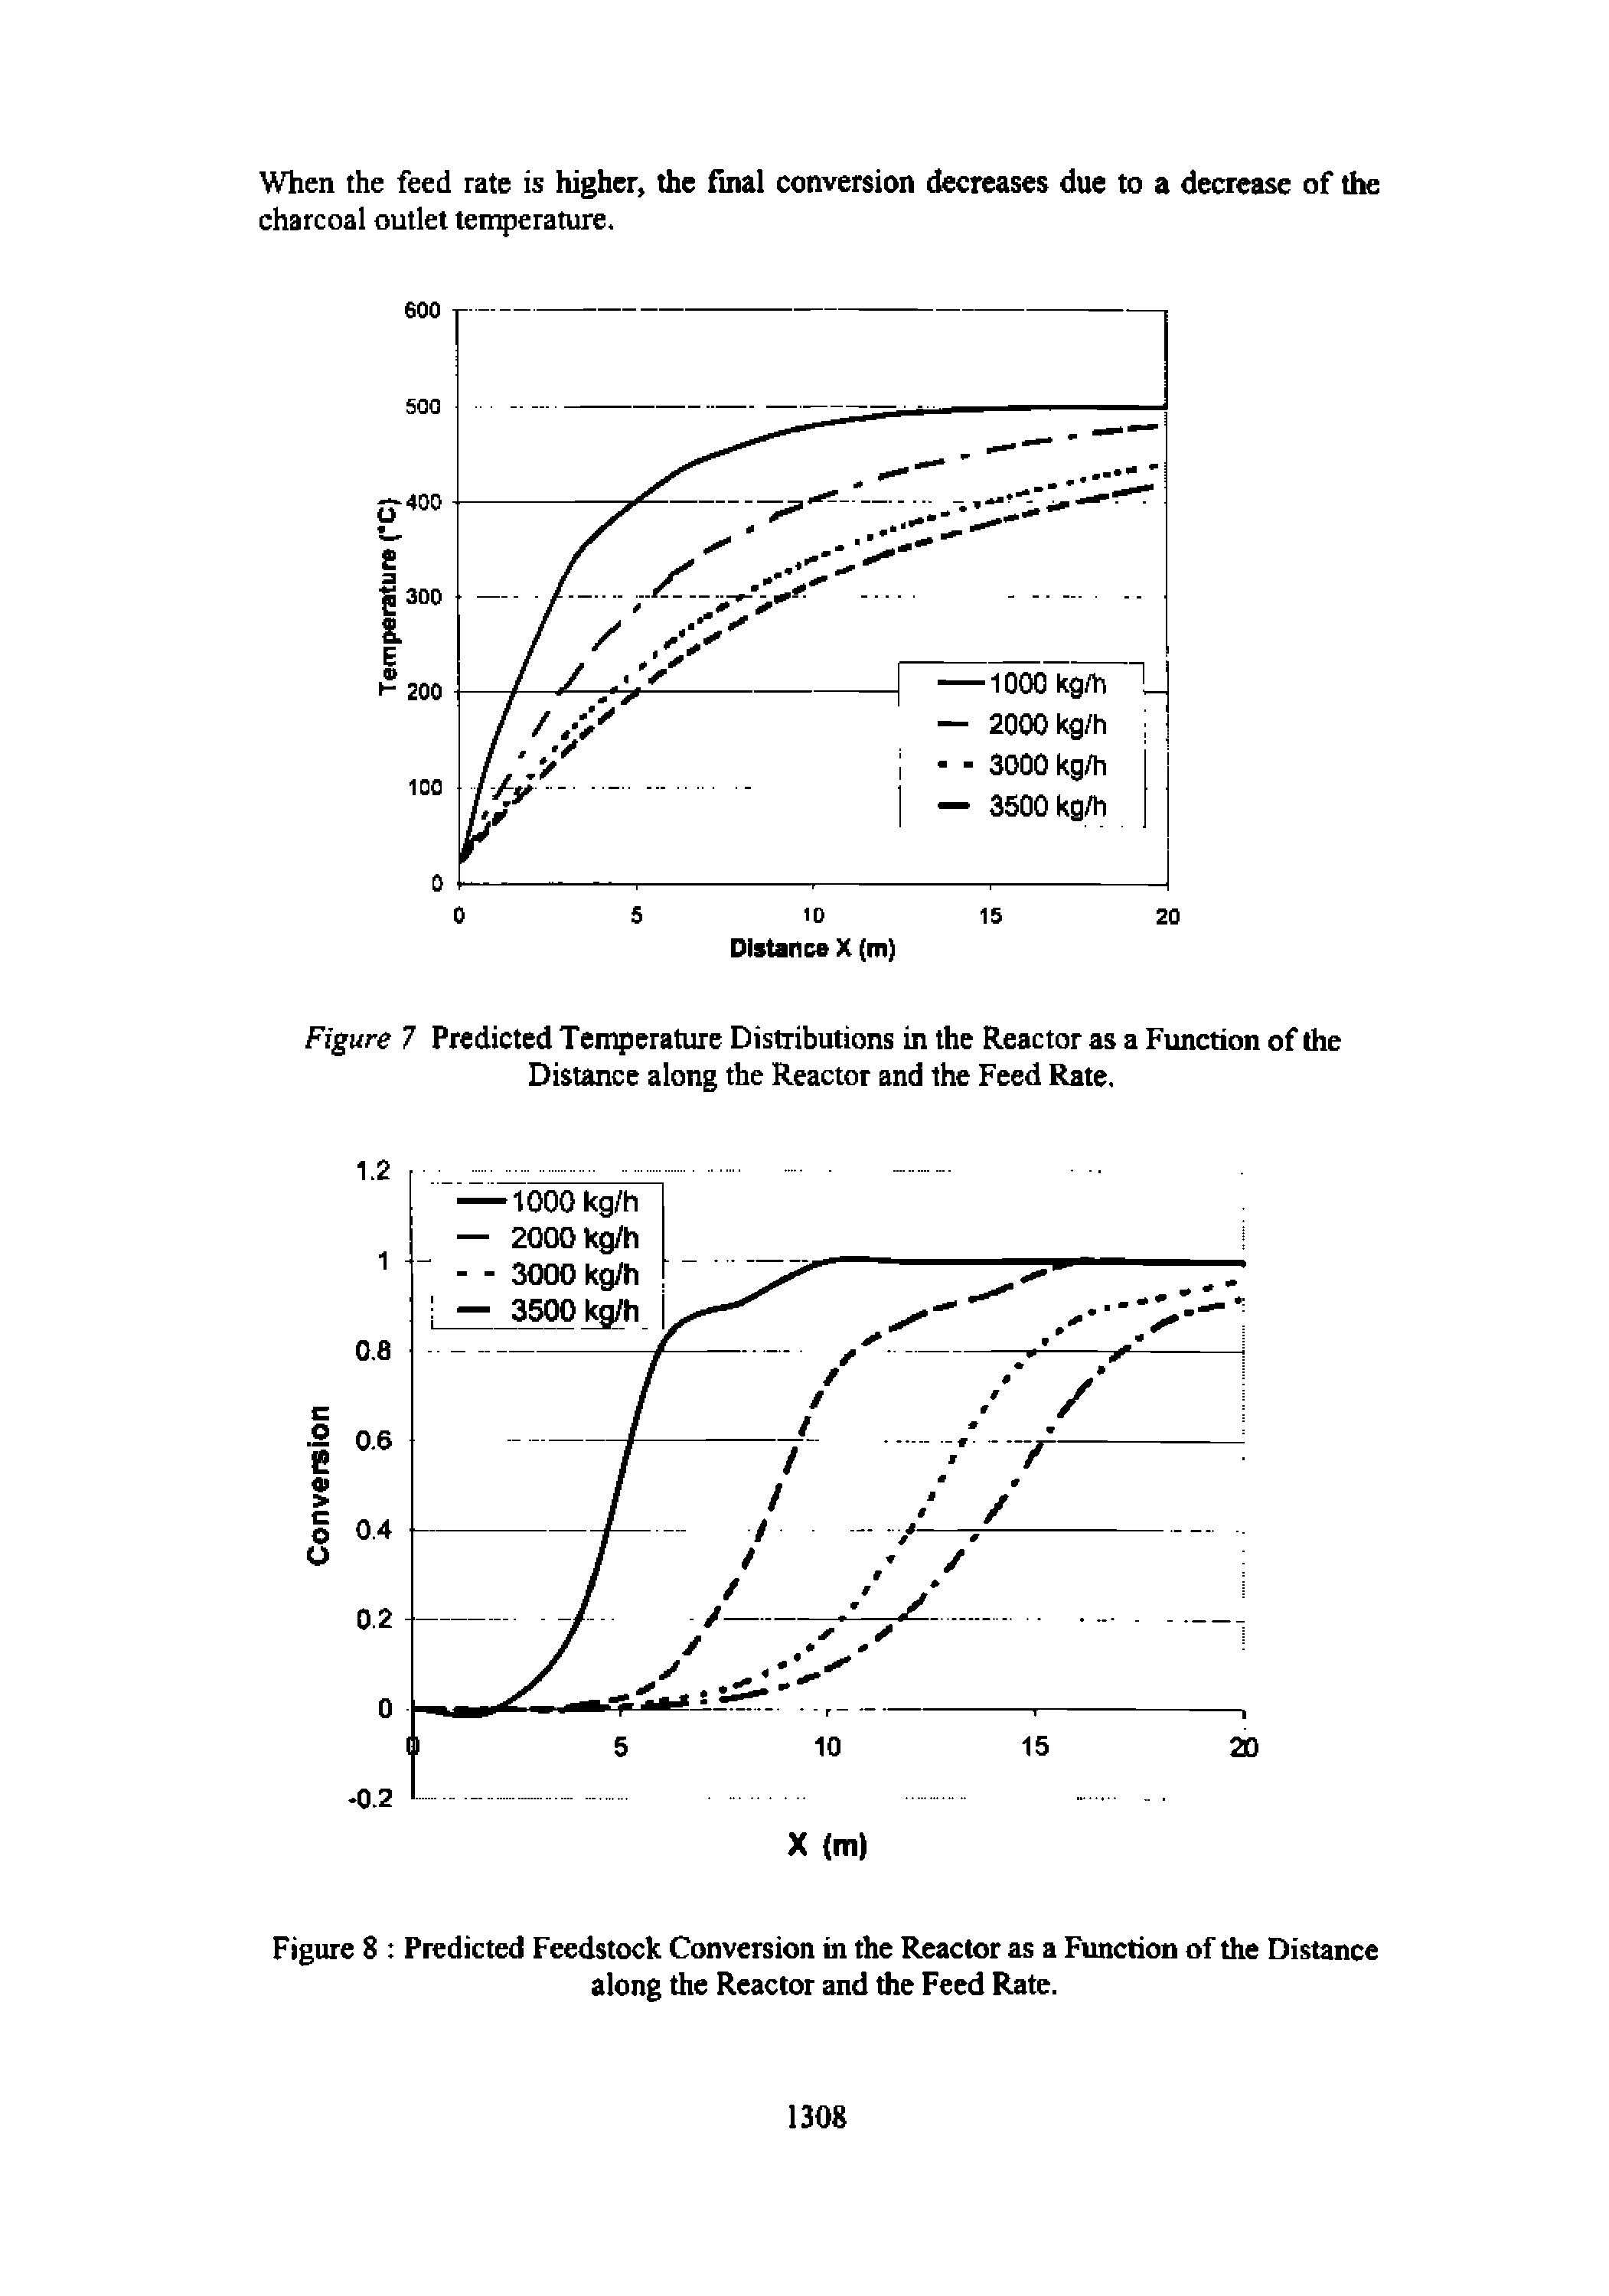 Figure 7 Predicted Temperature Distributions in the Reactor as a Function of the Distance along the Reactor and the Feed Rate.